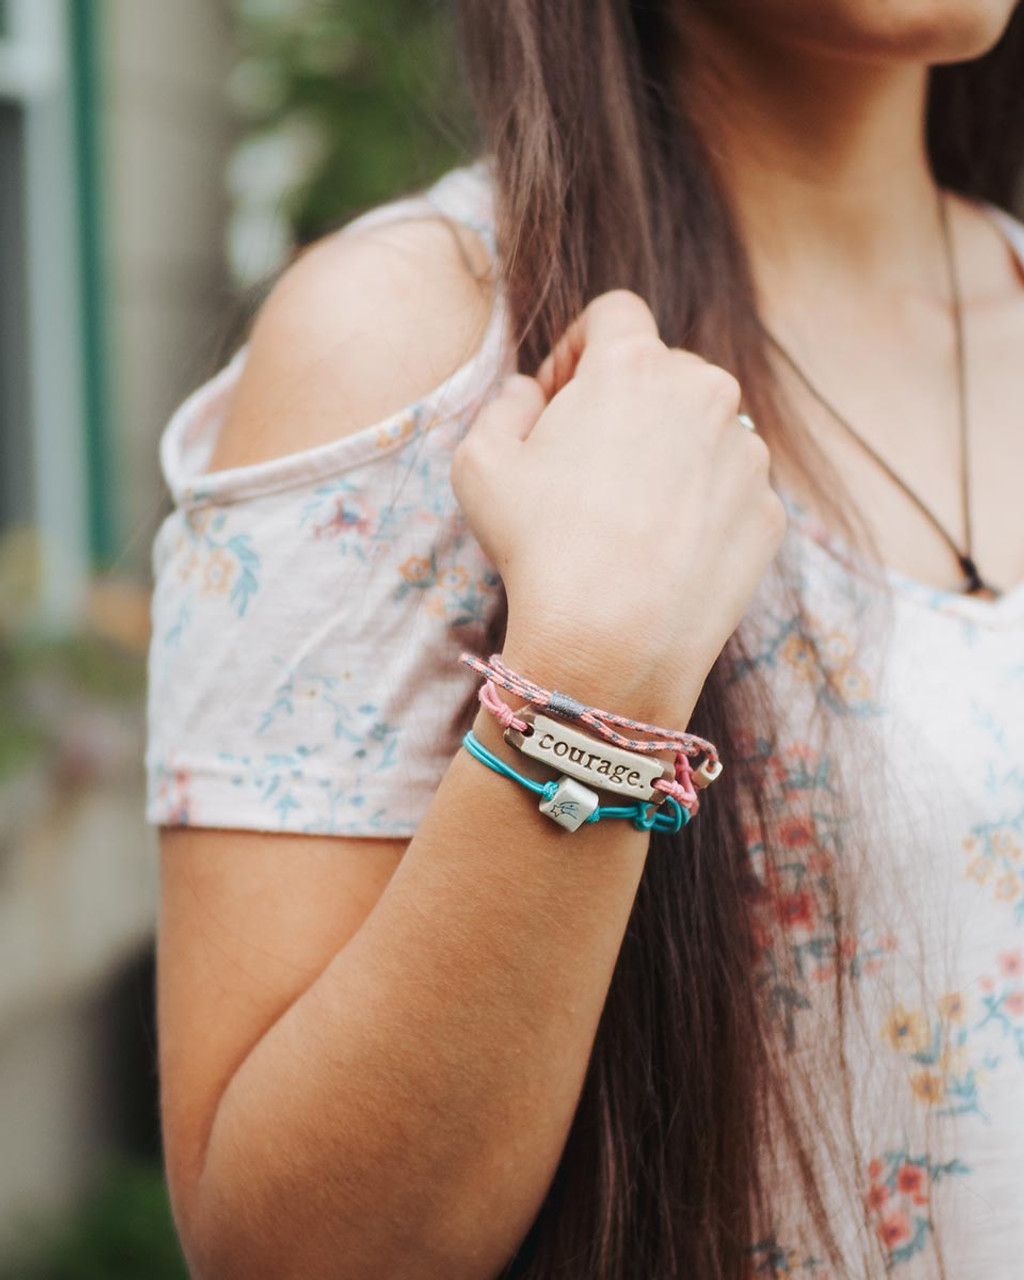 Mud Love Bracelets The Global Local, 55% OFF